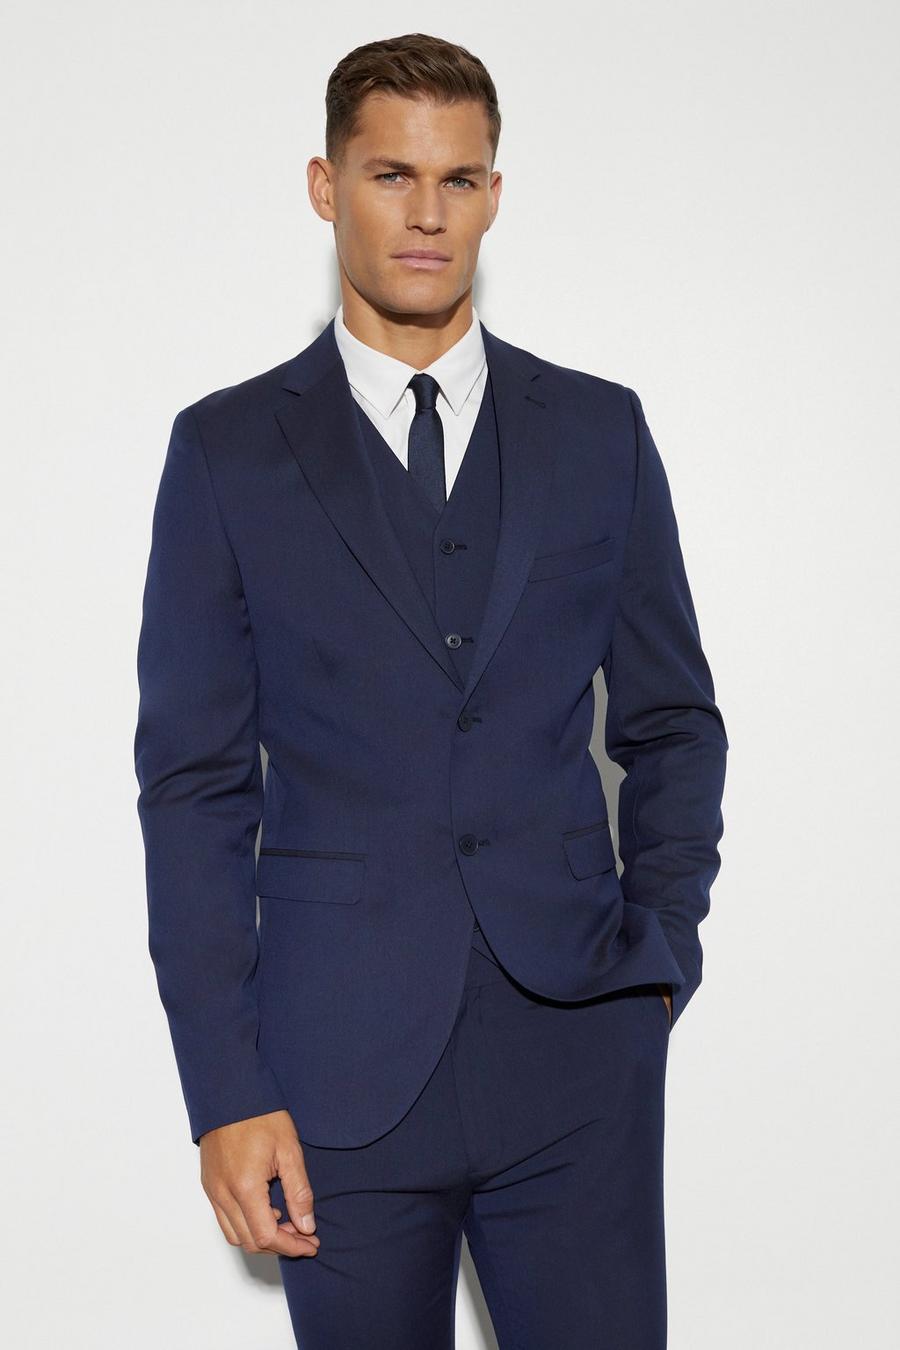 Giacca smoking Tall a monopetto Skinny Fit, Navy blu oltremare